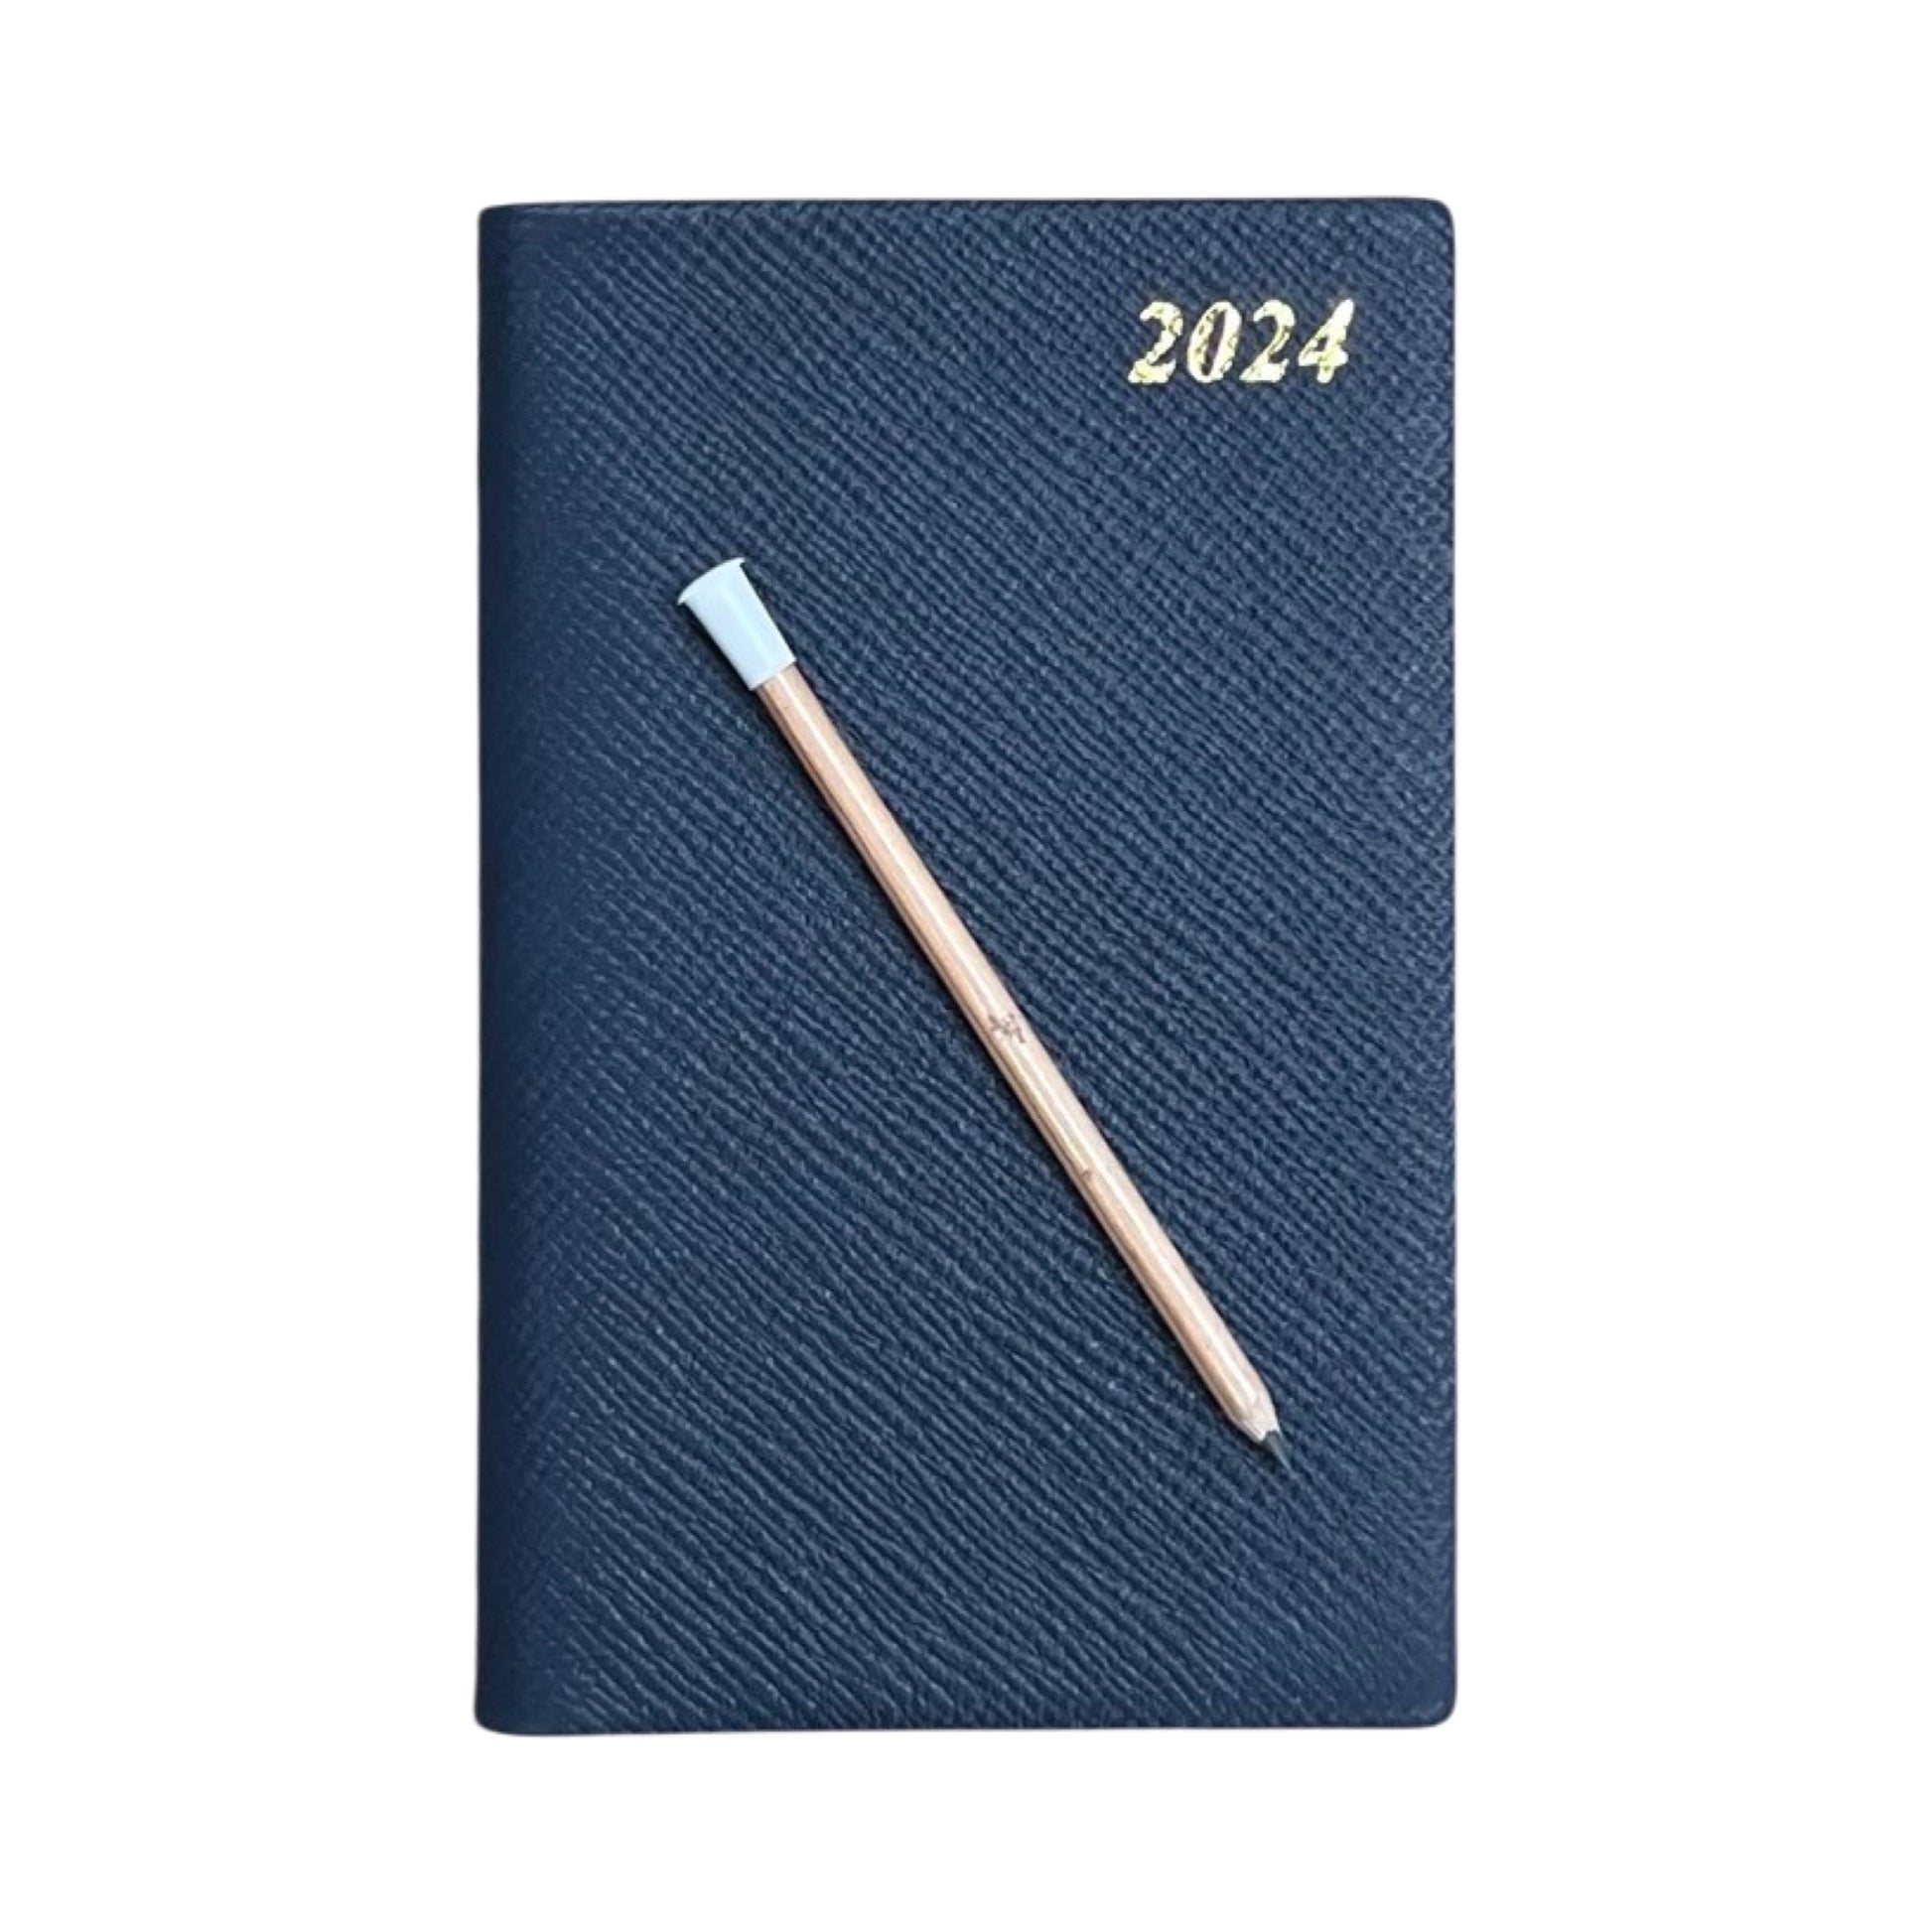 Charing Cross, 2023 Leather Planner Calendar with Pencil and Clip Calendar